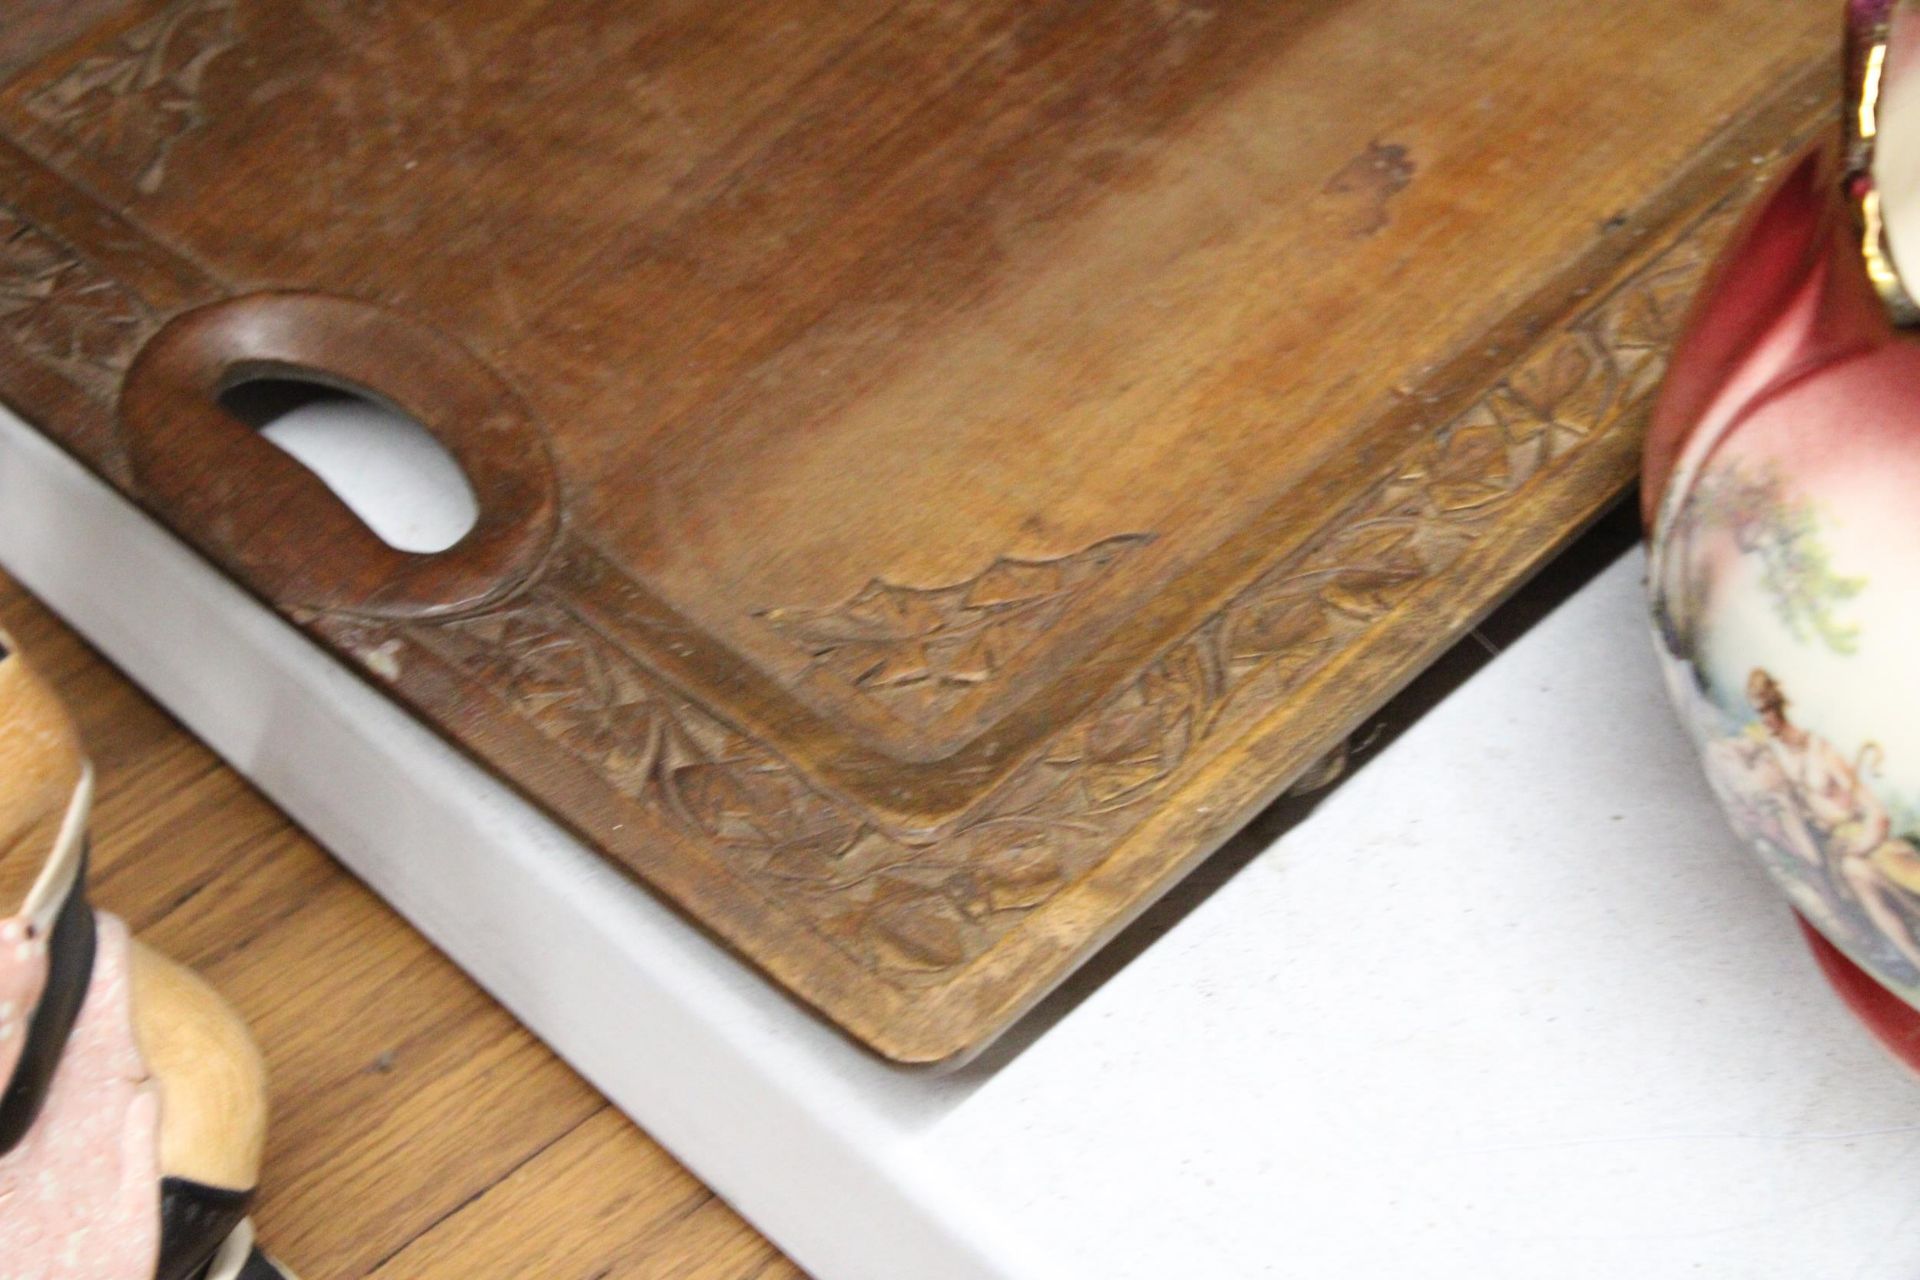 TWO VINTAGE WOODEN TRAYS, ONE WITH CARVED EDGES PLUS A MAHOGANY BOWL ON BUN FEET - Image 3 of 4